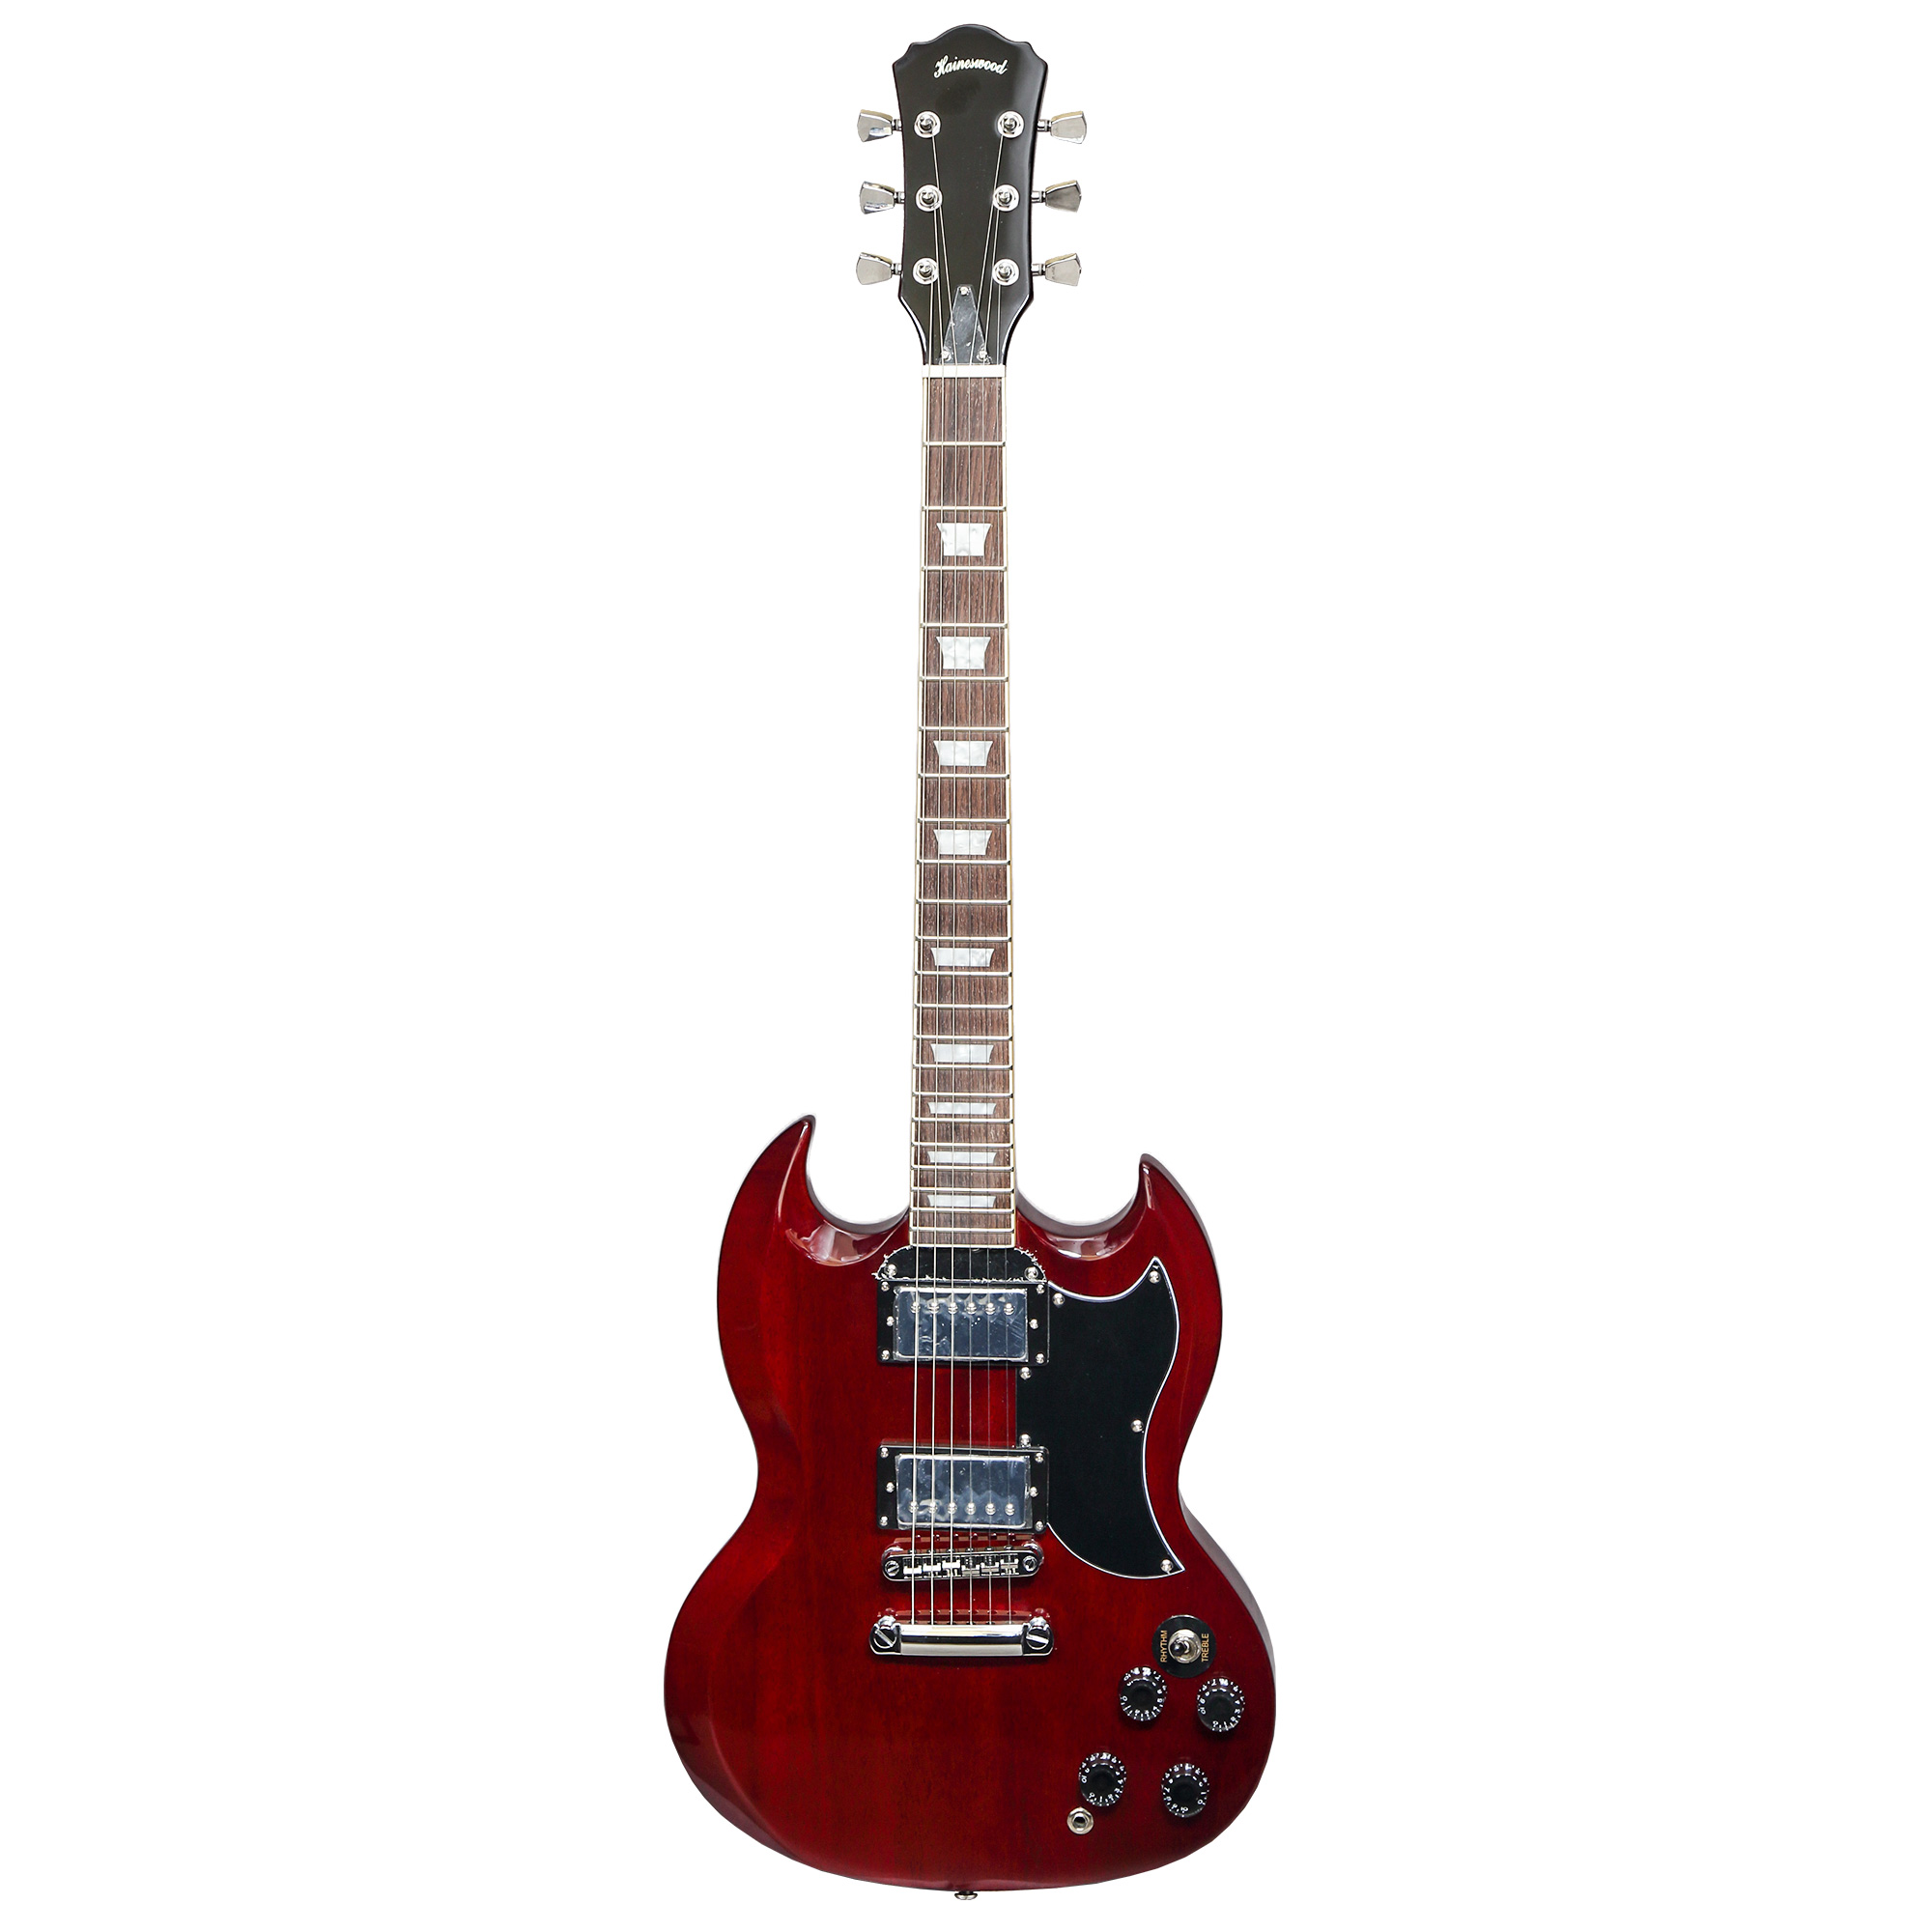 Haineswood Premier Series HSG300WRD Electric Guitar (Wine Red)